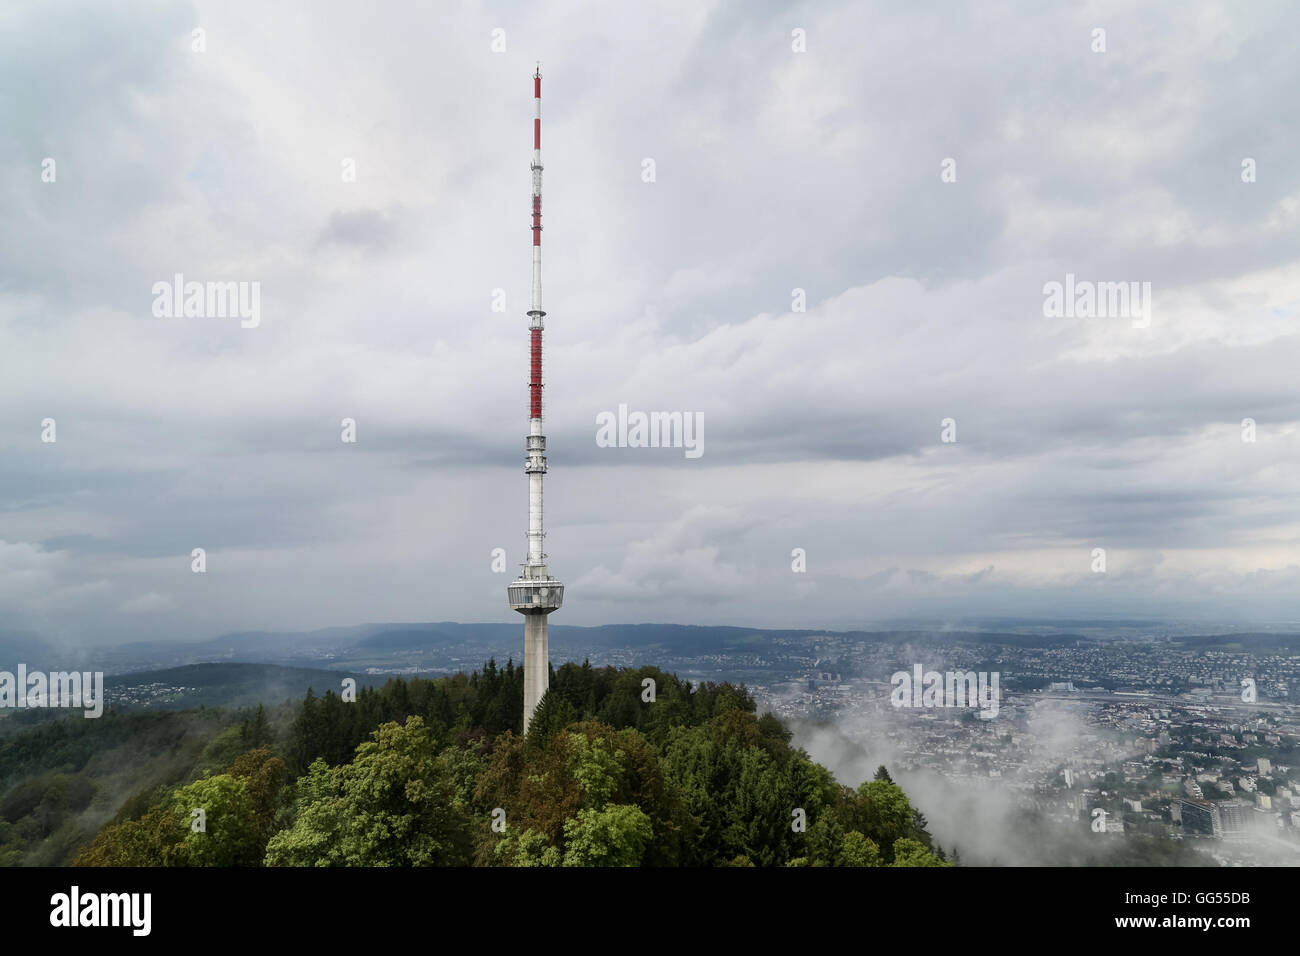 The Uetilberg TV Tower perched at the top of Üetliberg, near Zurich in Switzerland. Stock Photo